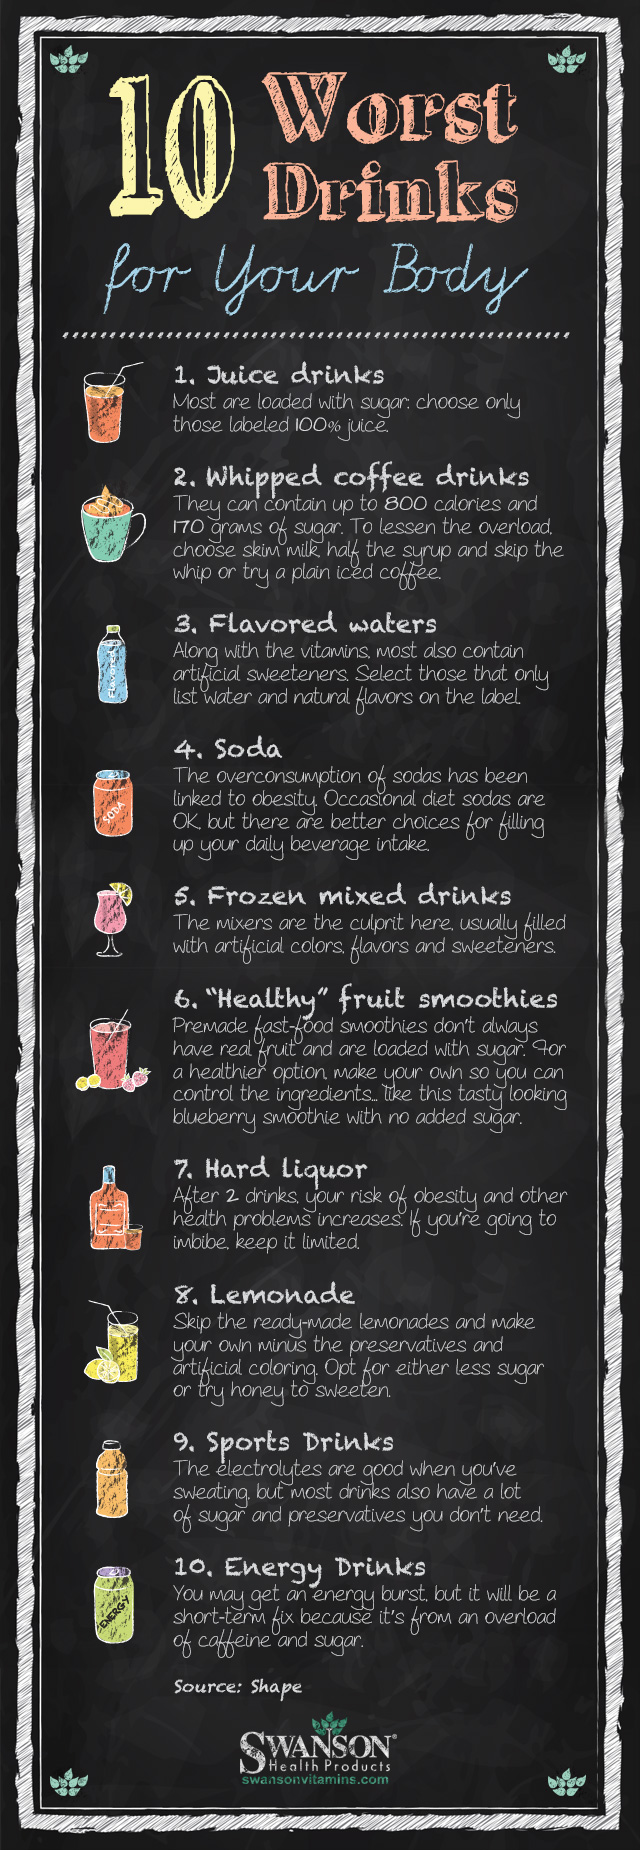 10 Worst Drinks for Your Body